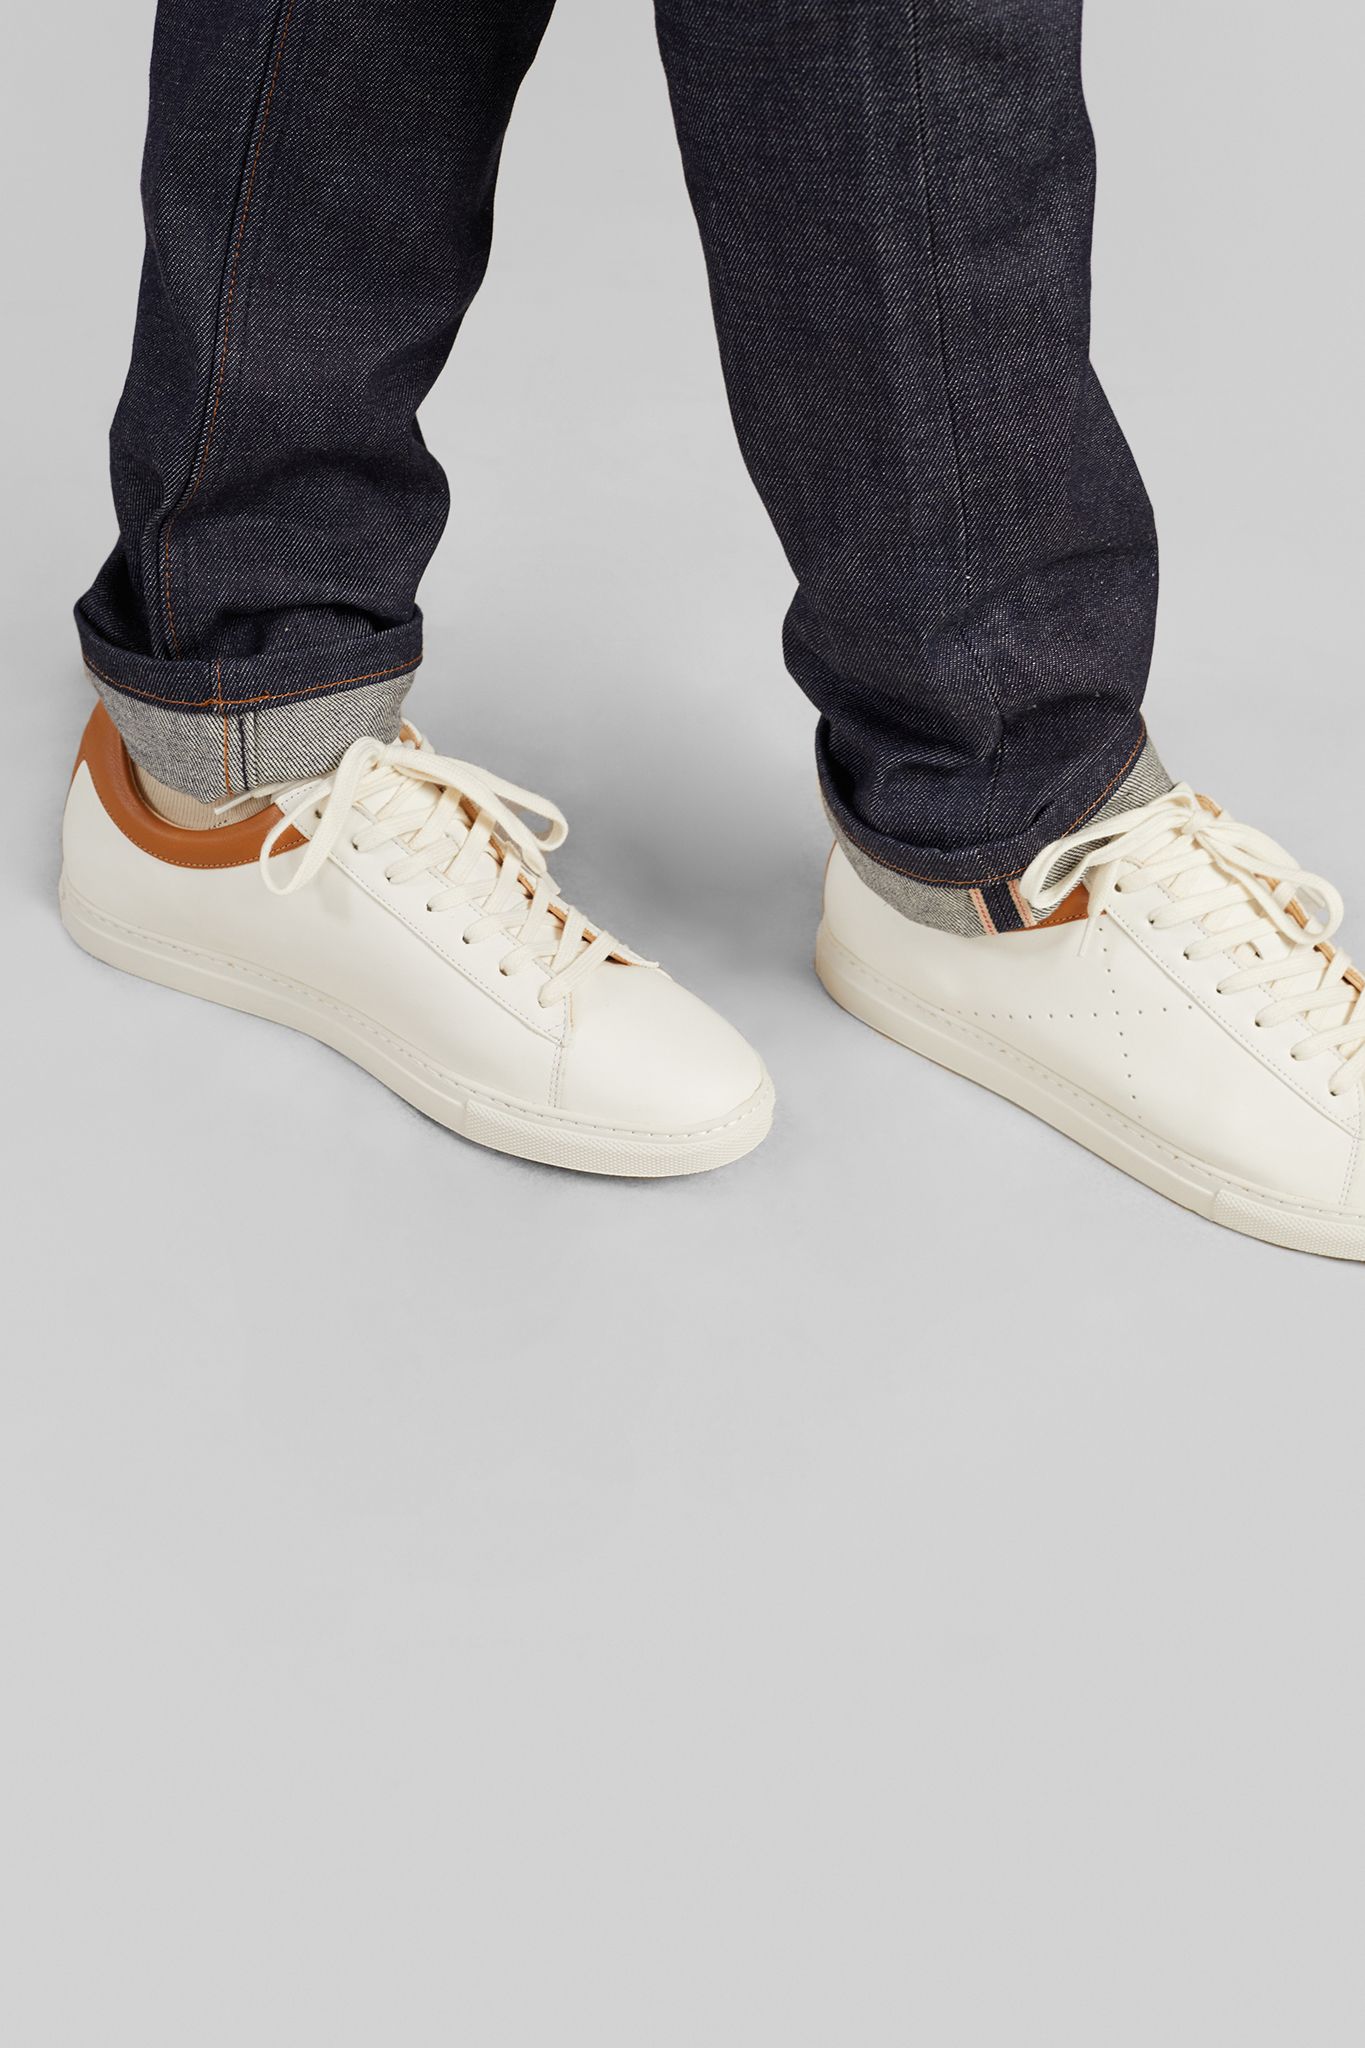 Well-designed sneakers - L'Exception Paris